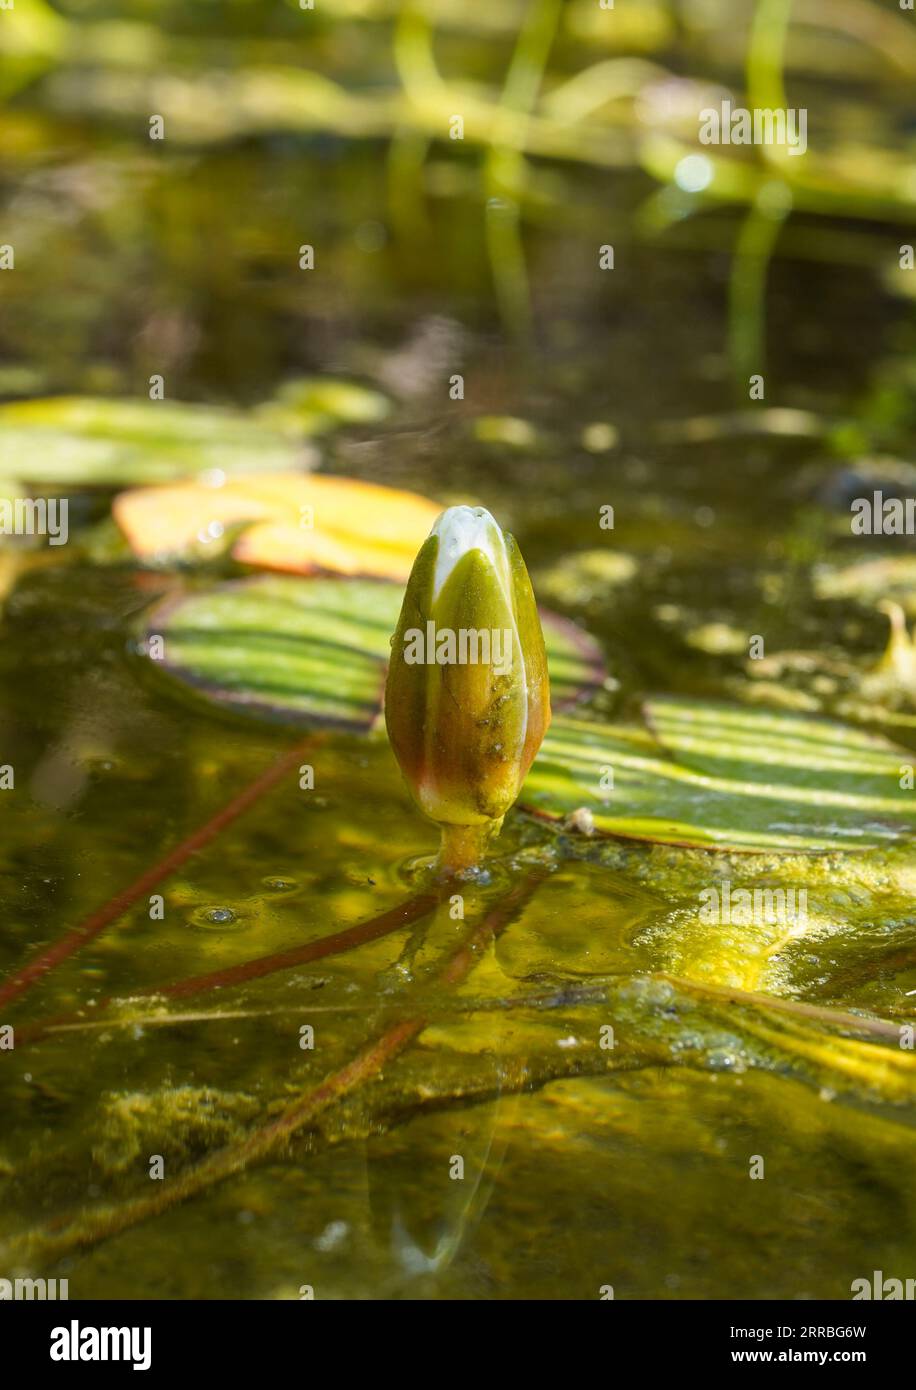 White water lily flower bud sticking out of water surface in a pond. Stock Photo